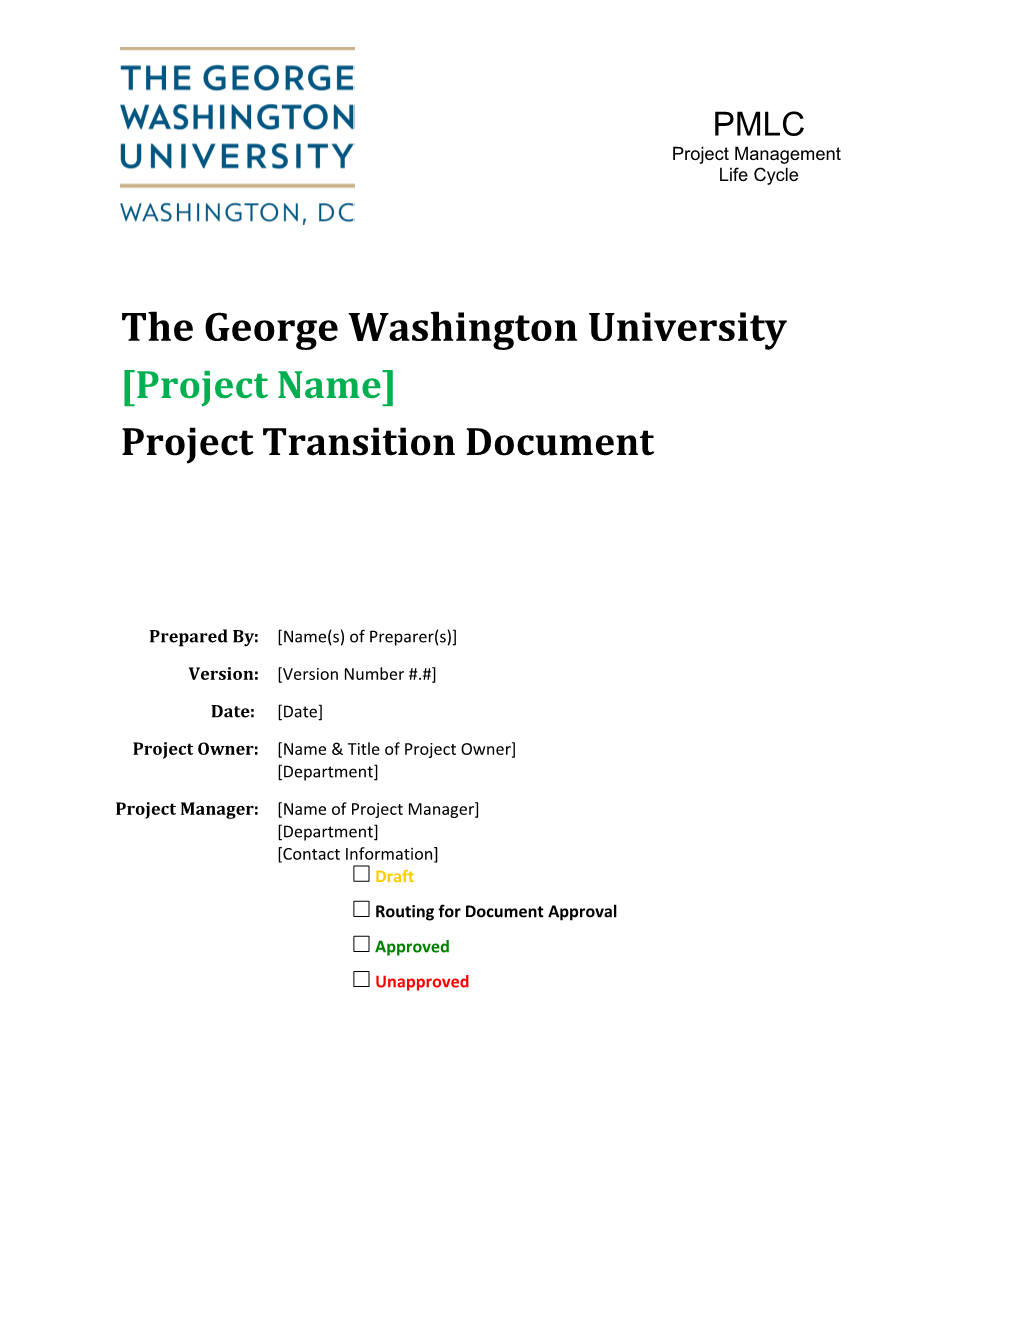 Project Transition Document